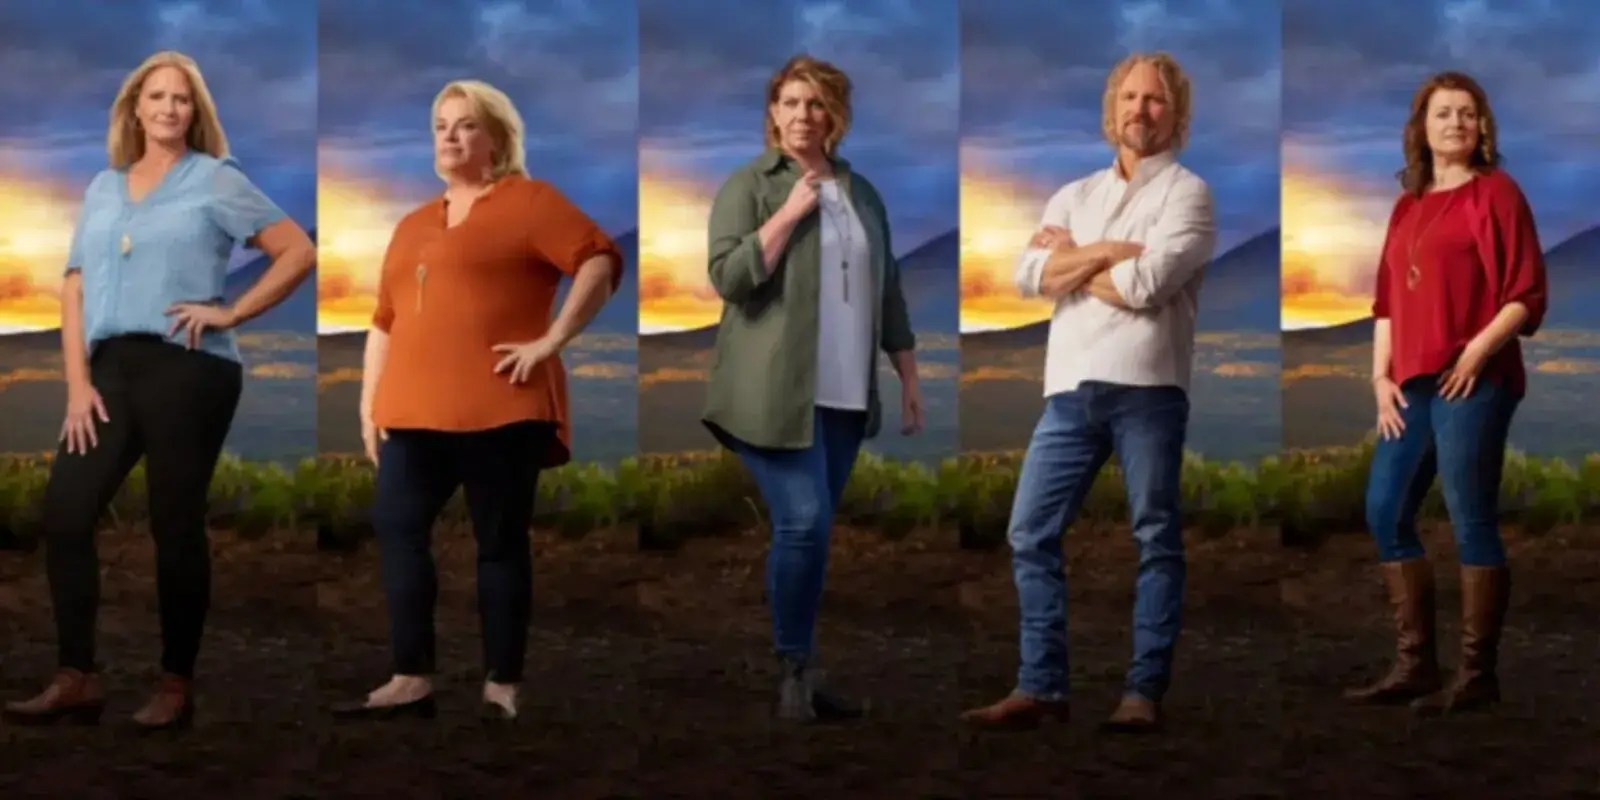 'Sister Wives' stars Christine, Janelle, Meri, Kody, and Robyn Brown.